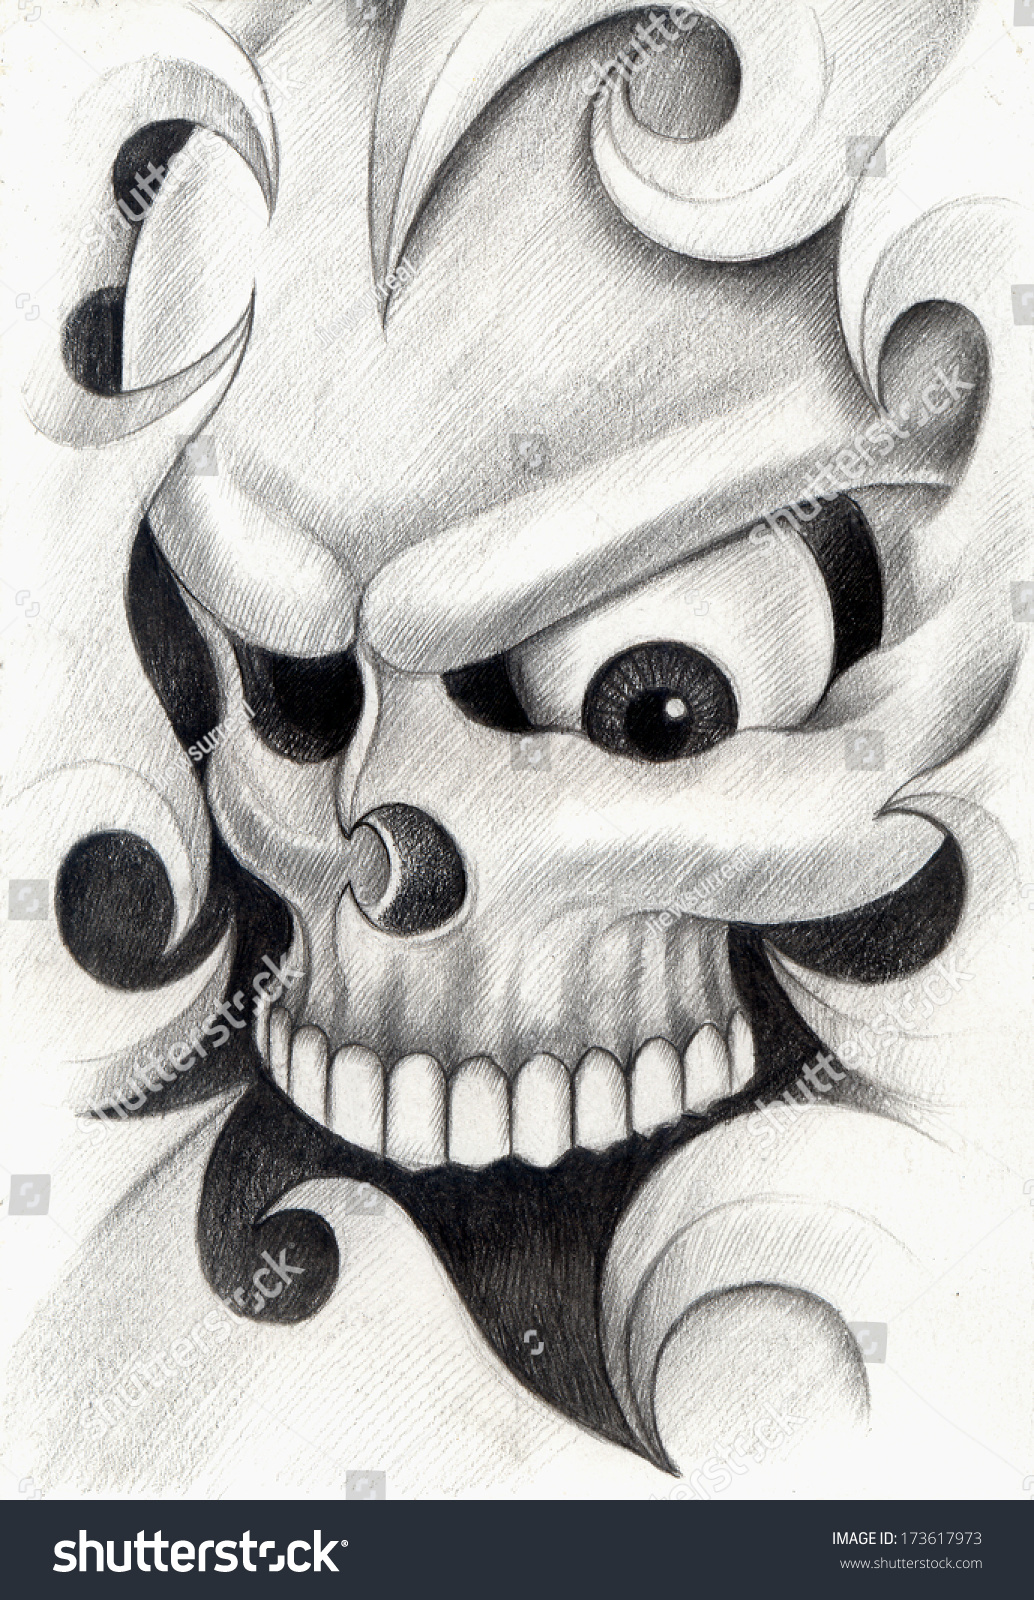 Skull Tattoo .Hand Drawing On Paper. Stock Photo 173617973 ...